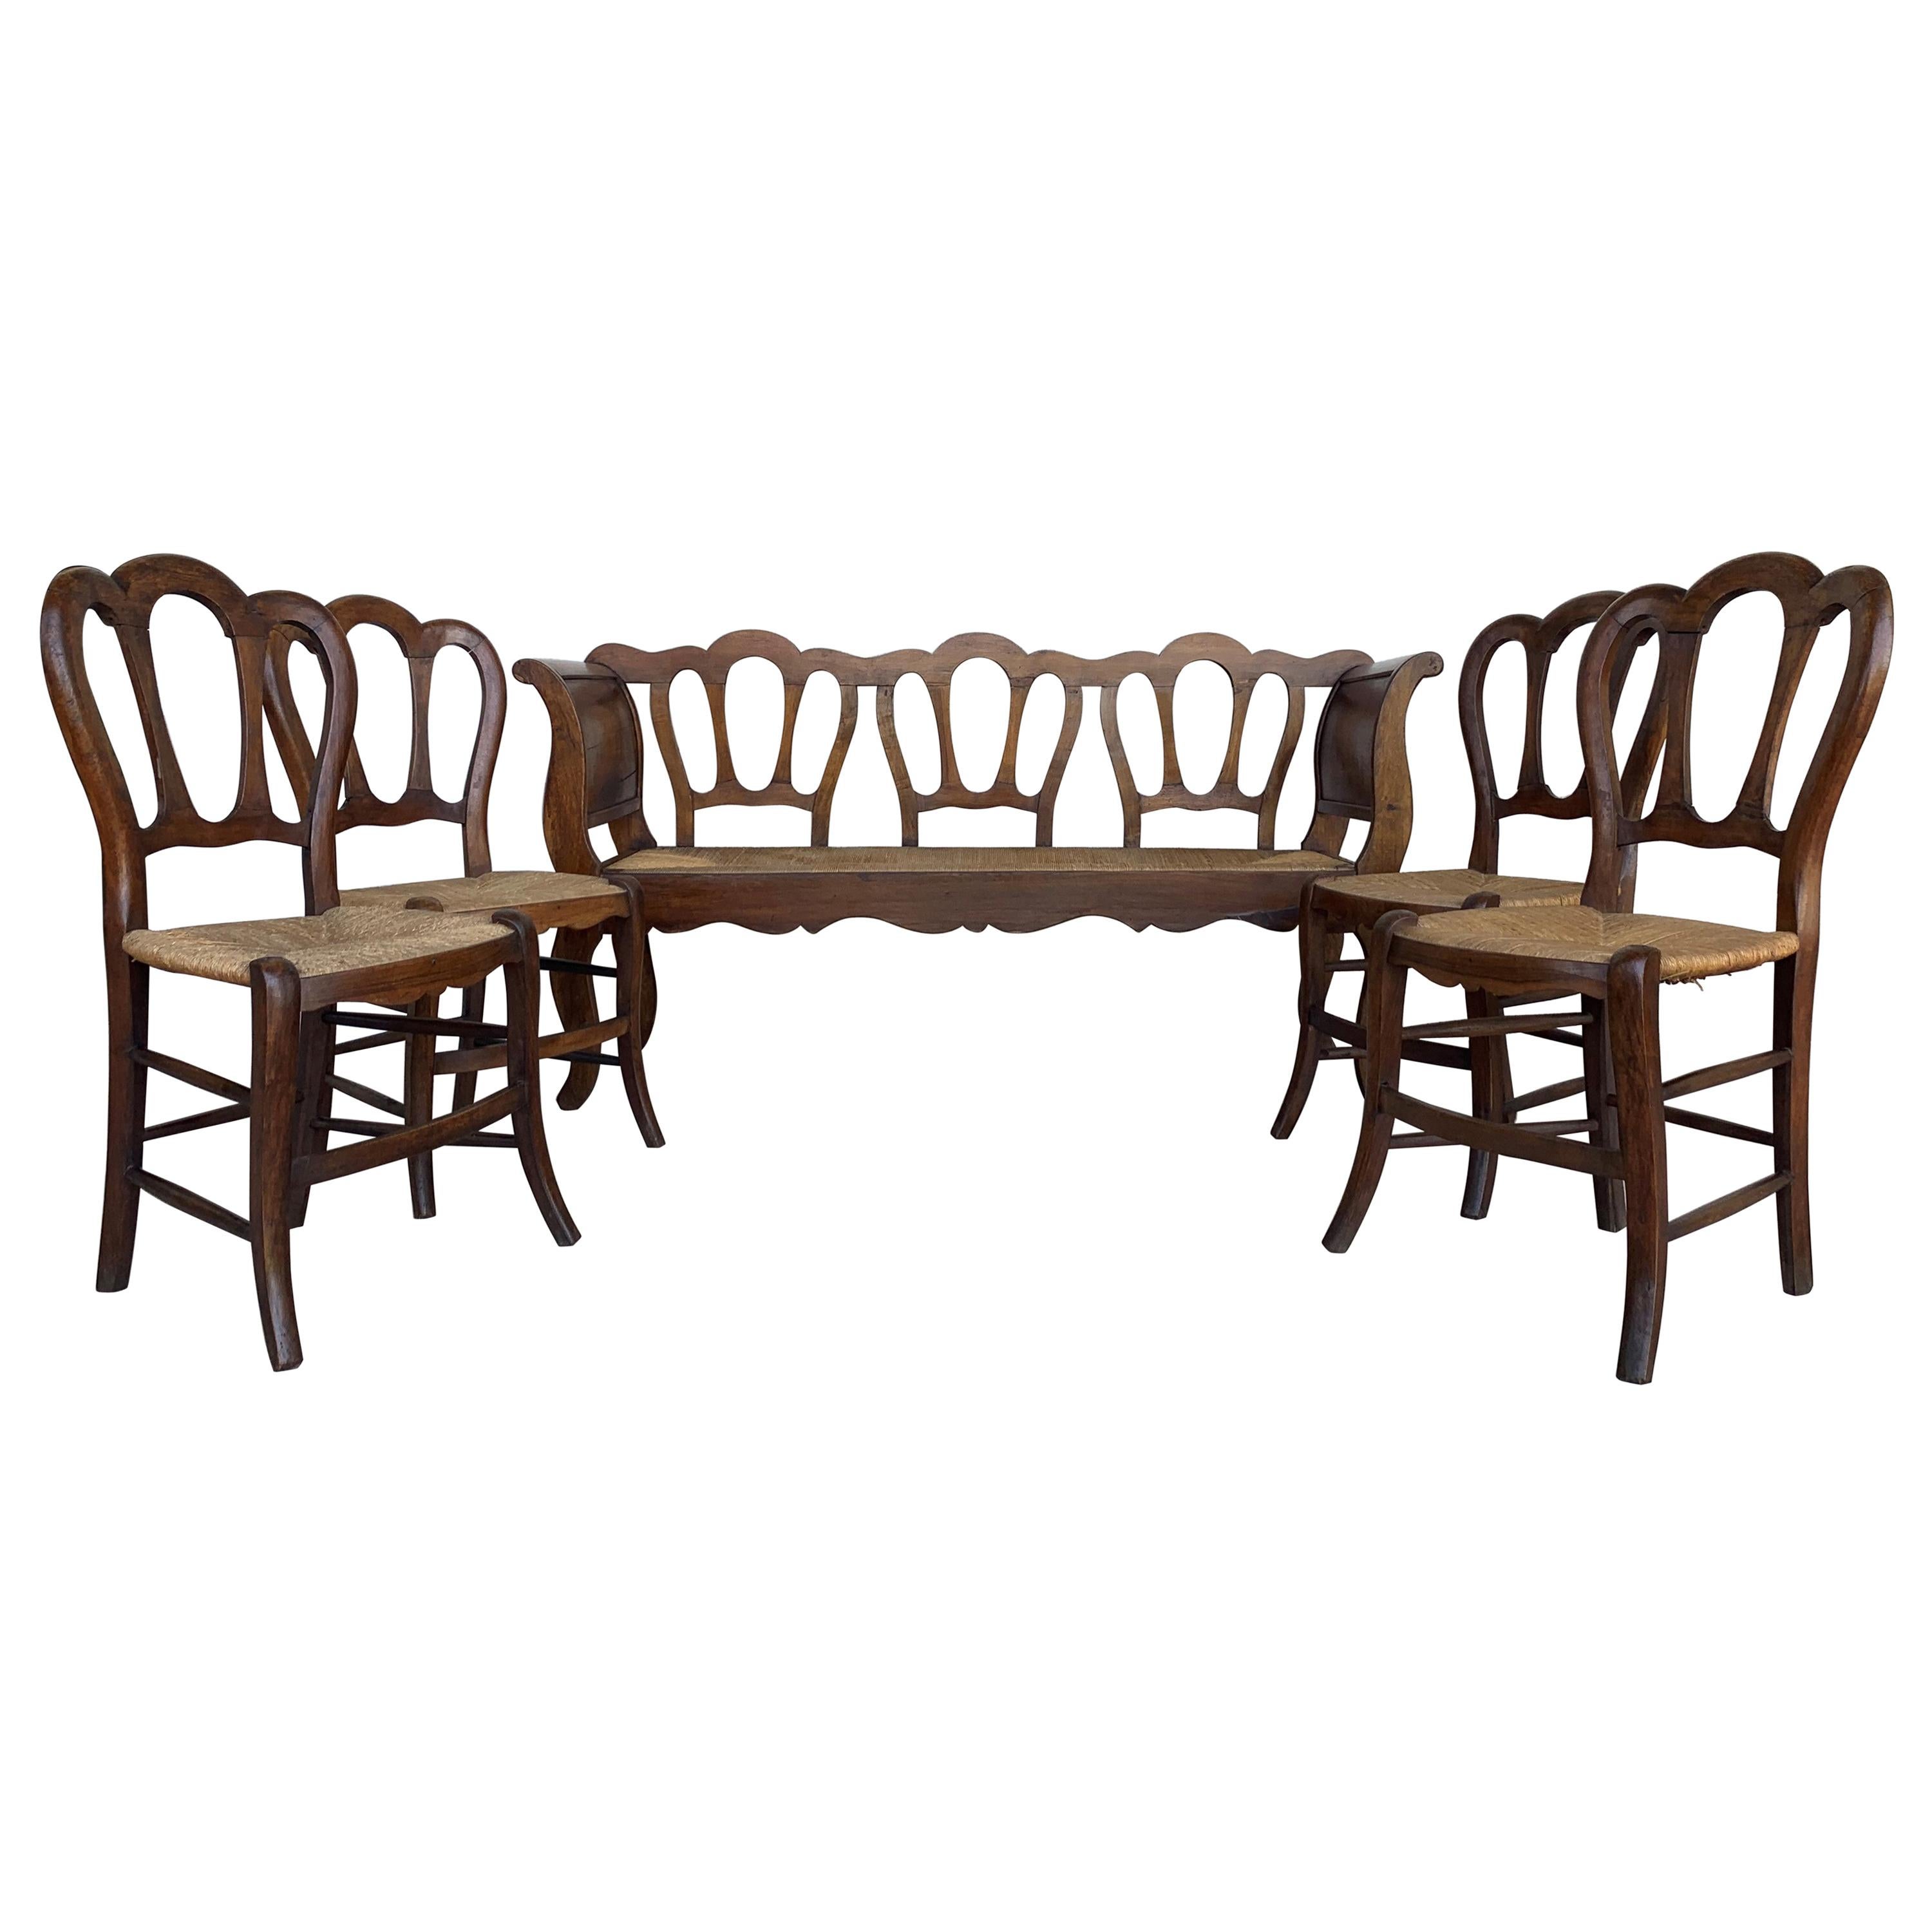 20th Set of One Bench and Four Victorian Chairs, Wood and Rattan